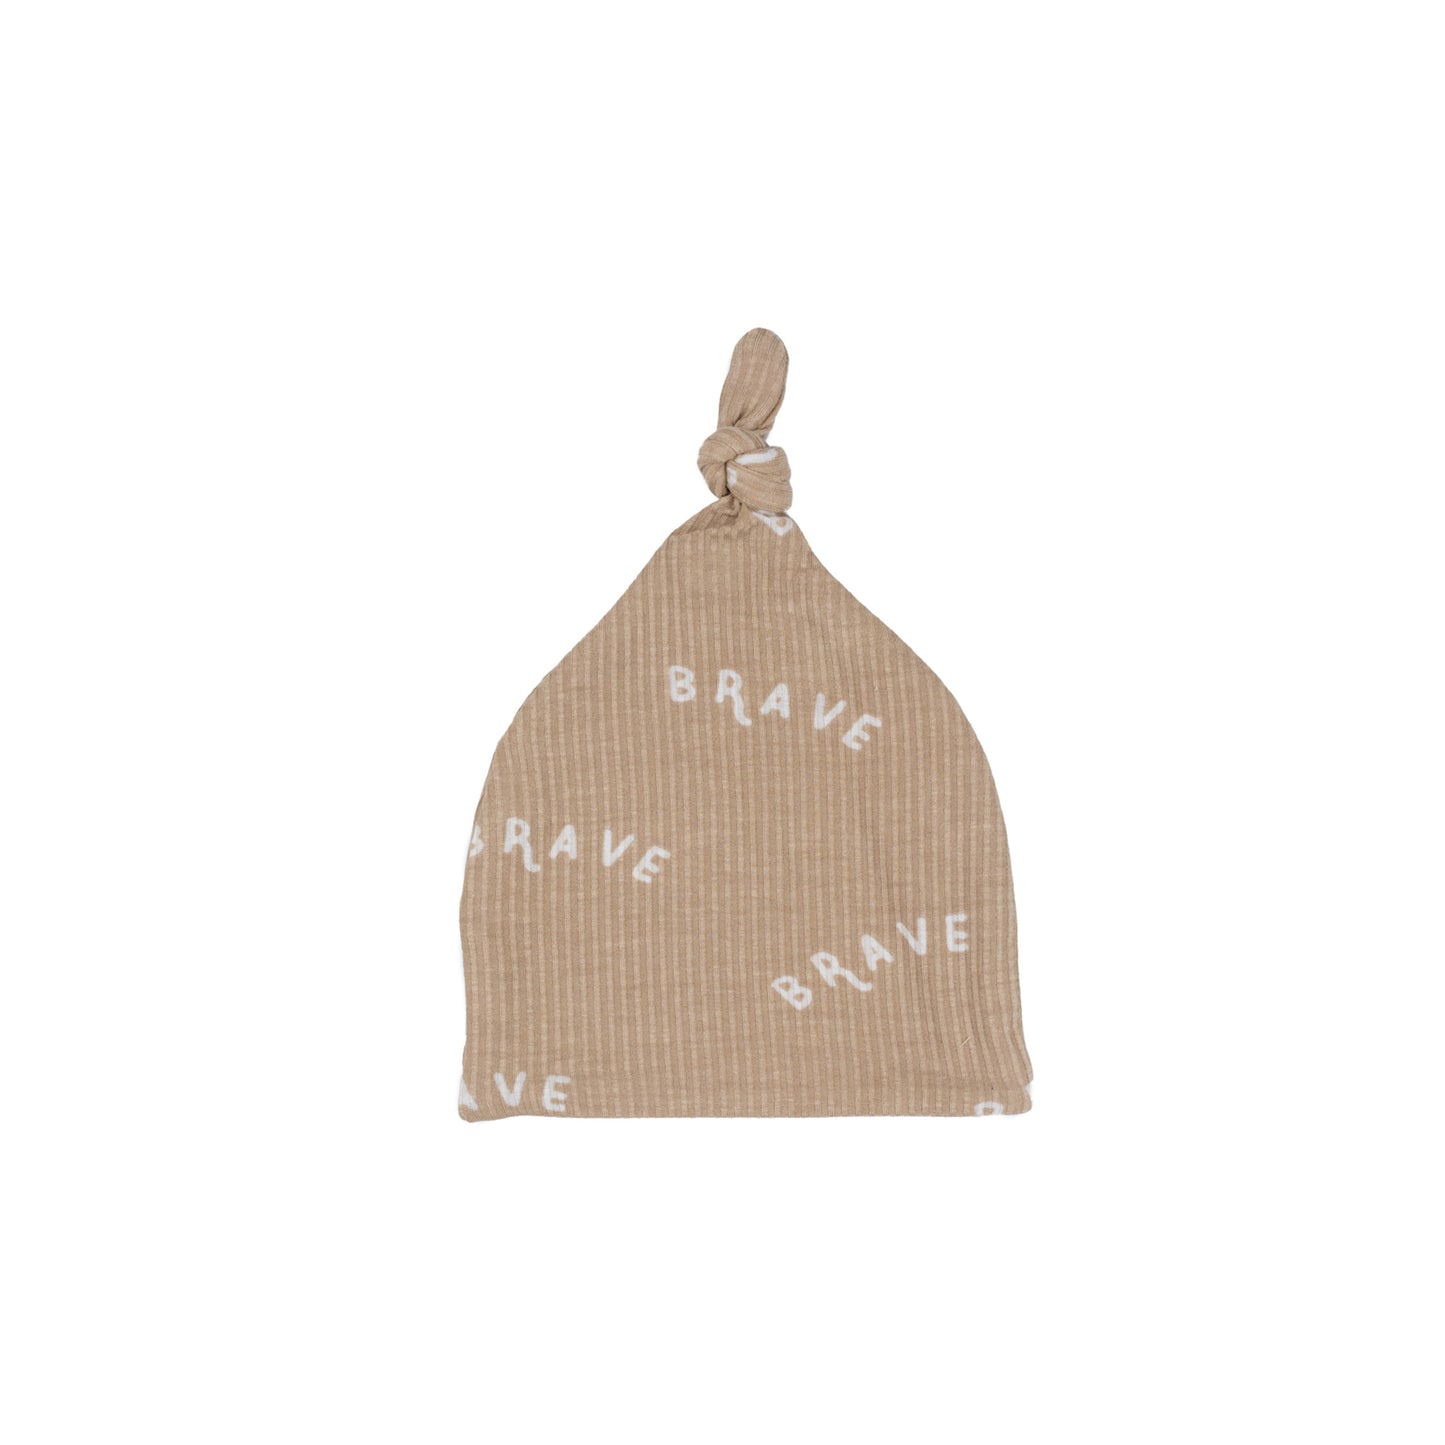 Brave Infant Top Knot Beanie